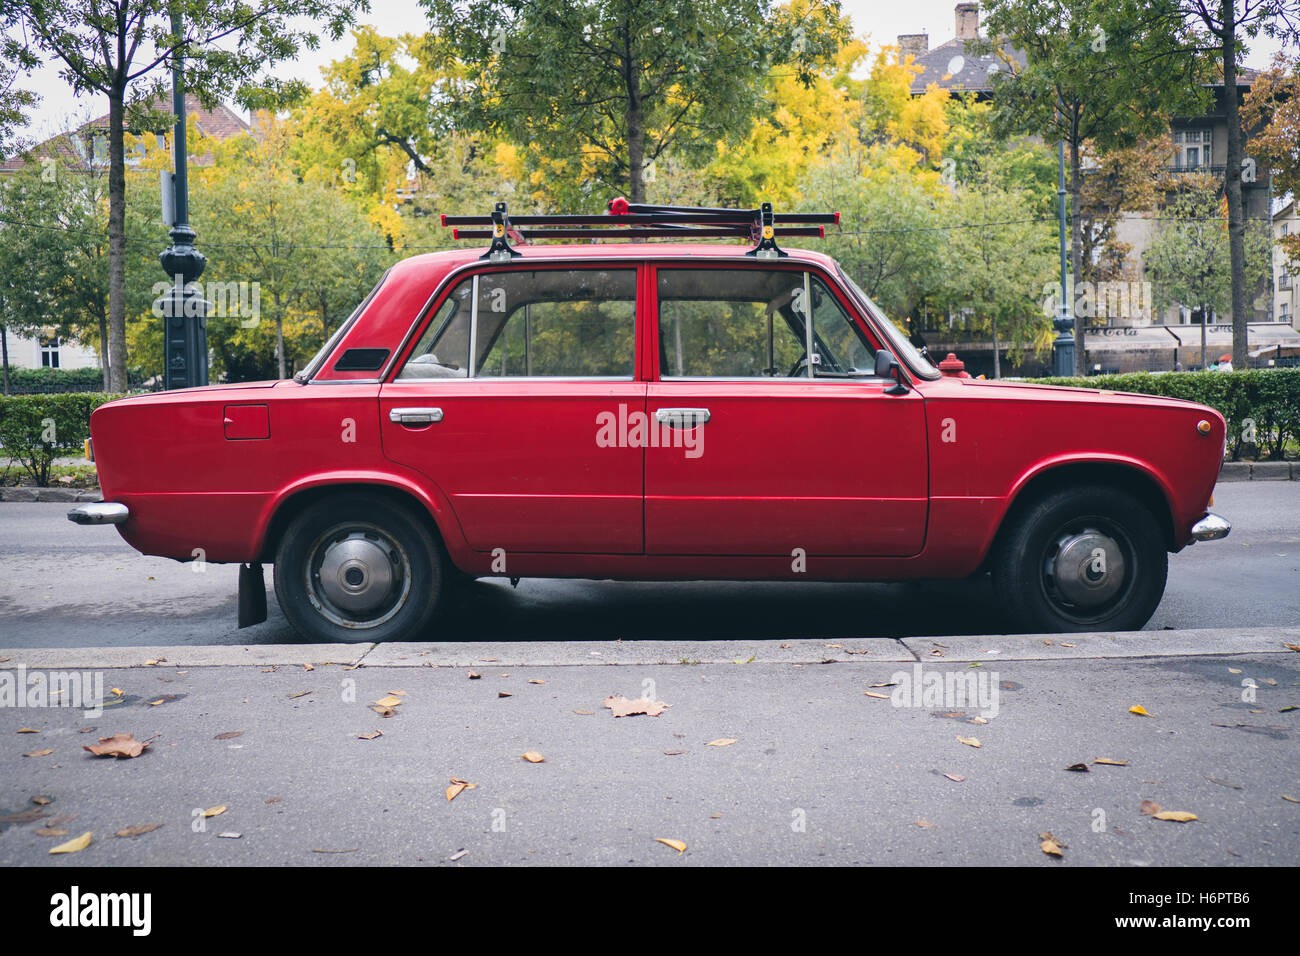 Red Lada car in Budapest, Hungary Stock Photo